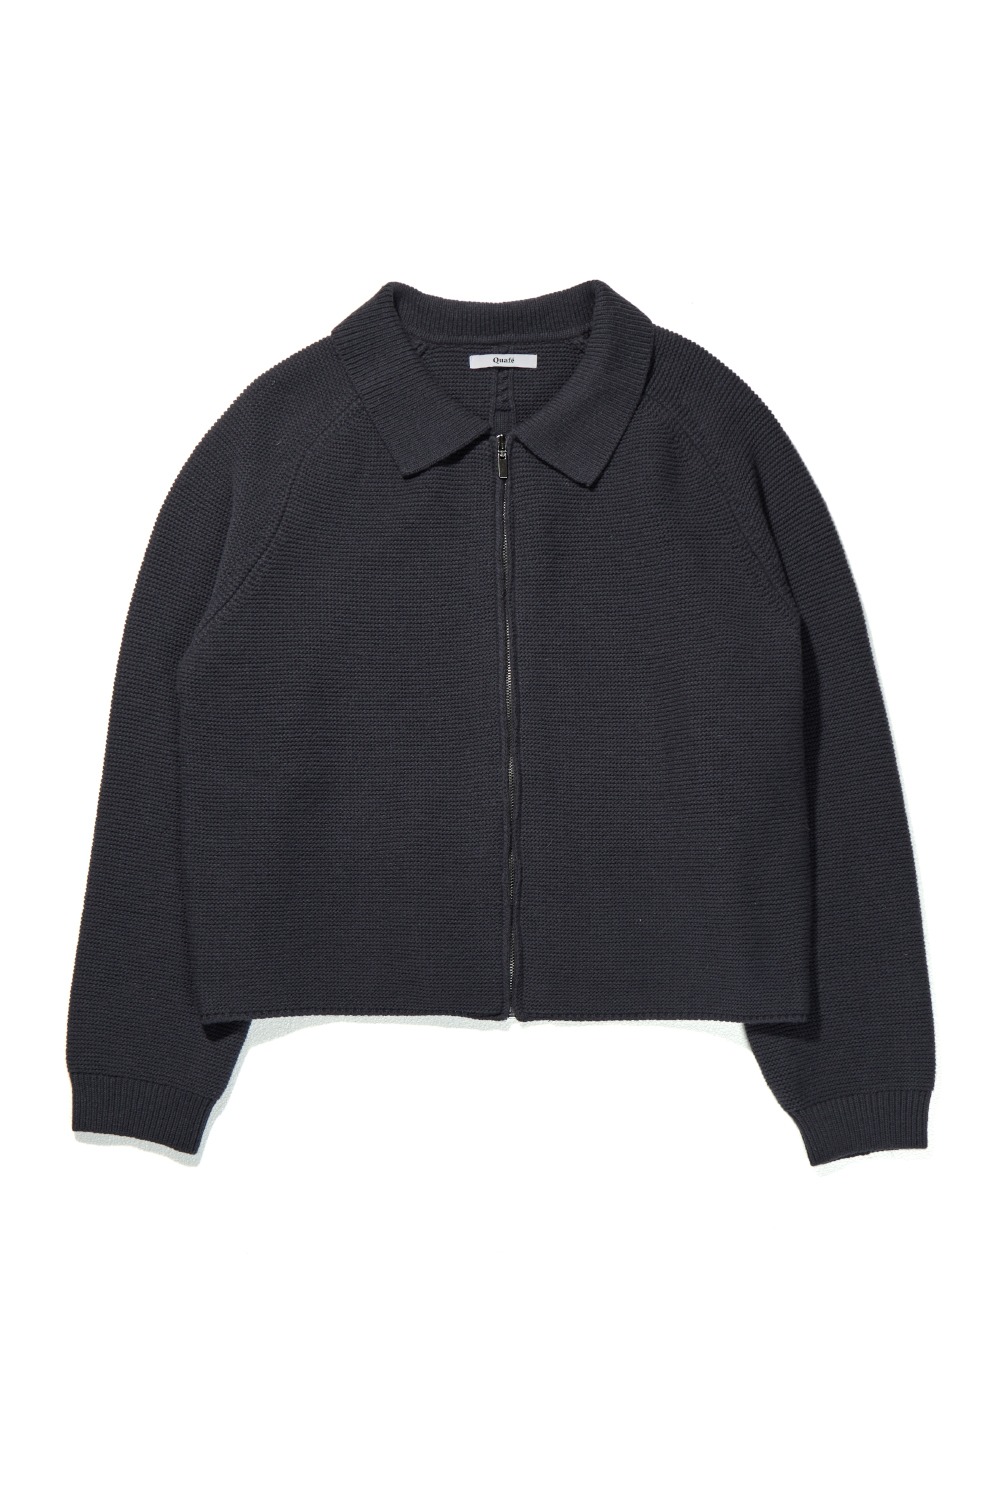 FINE WOOL ZIP-UP JACKET_Washed charcoal